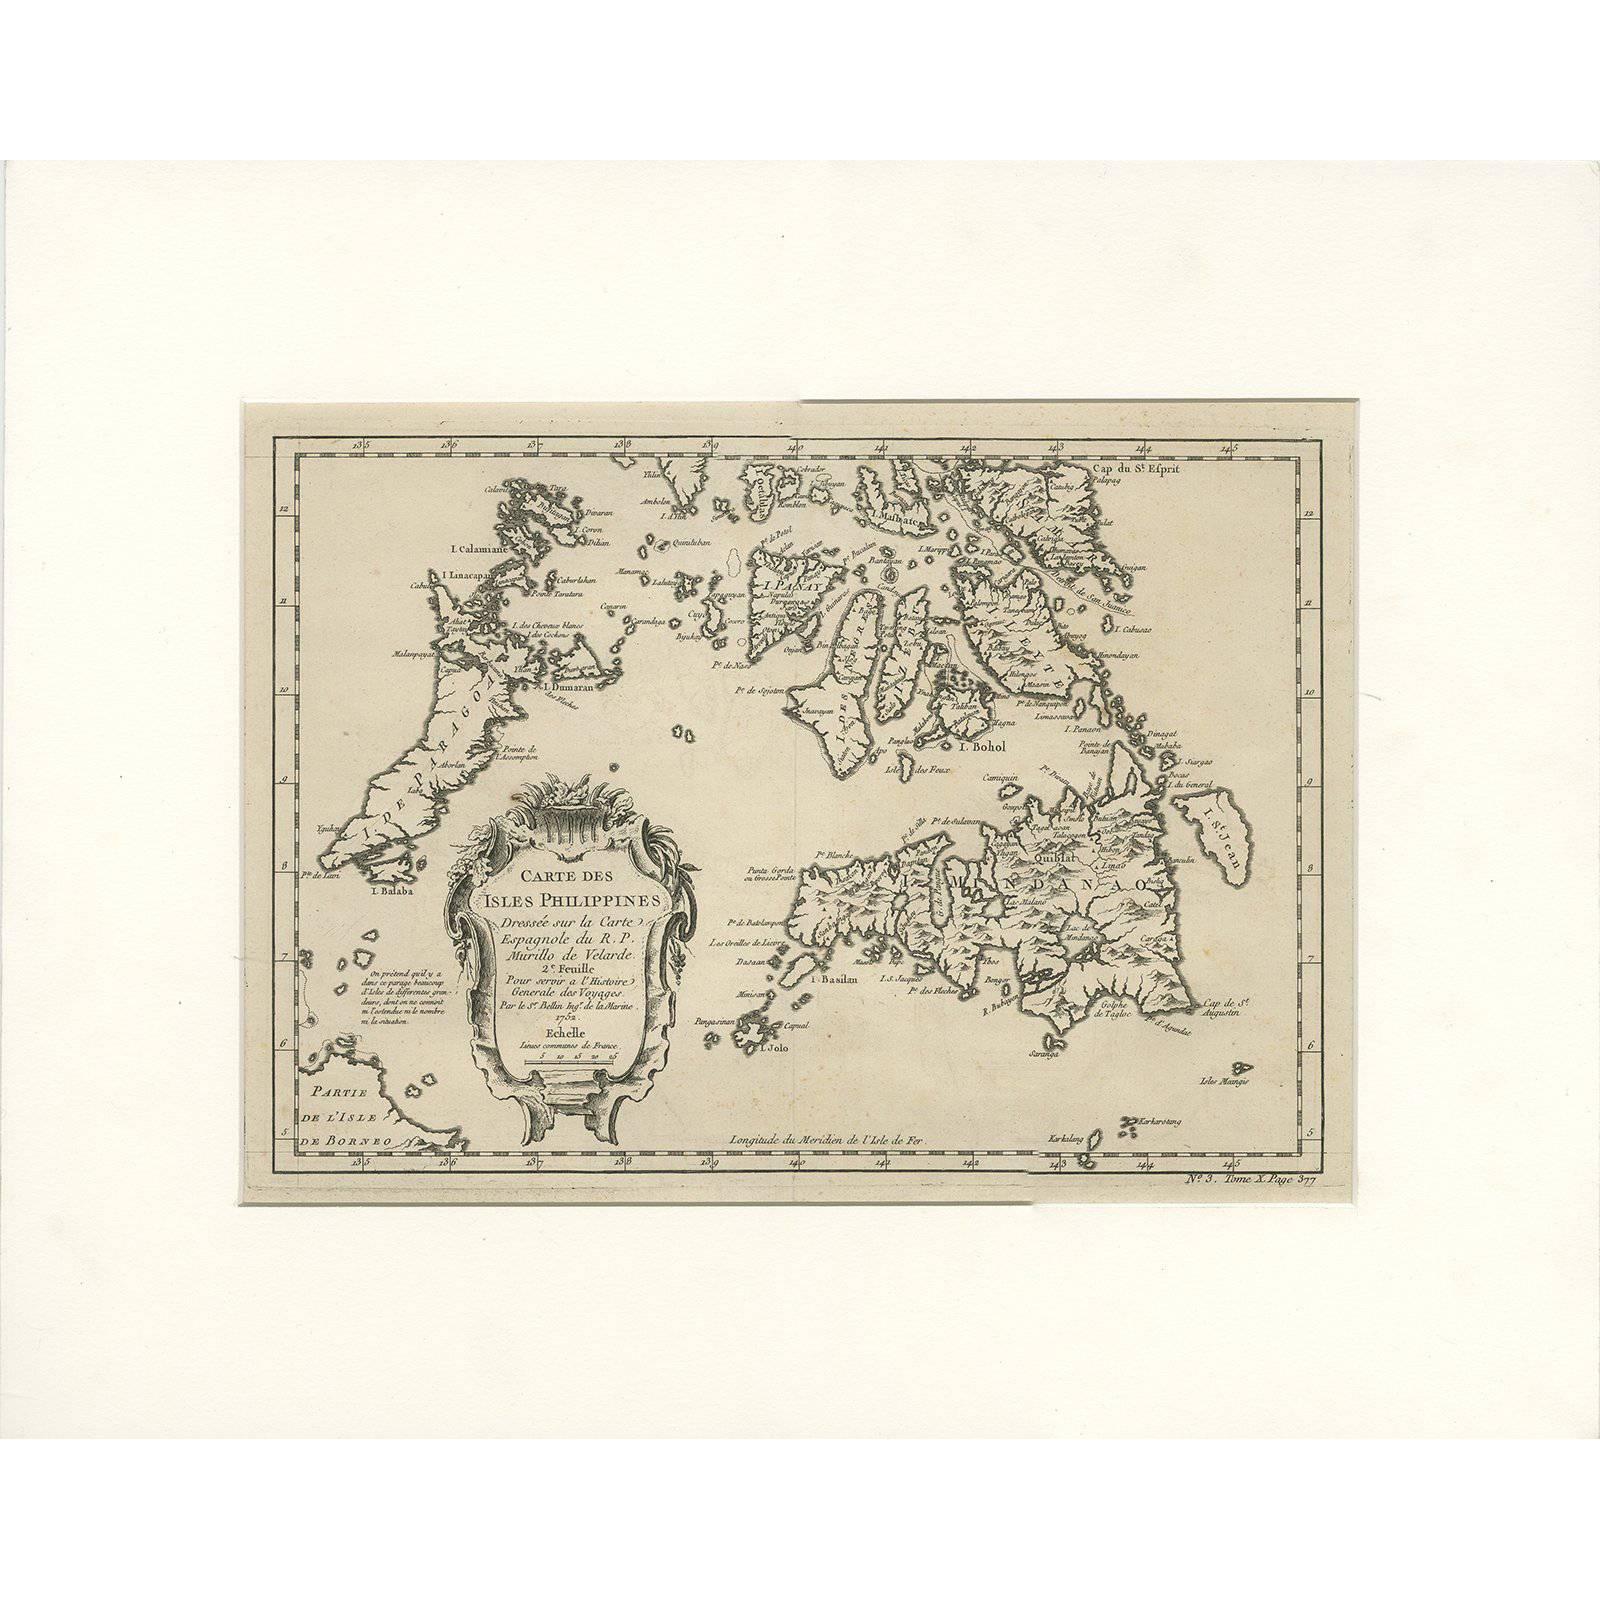 Antique Map of the Southern Philippines by J.N. Bellin, 1752